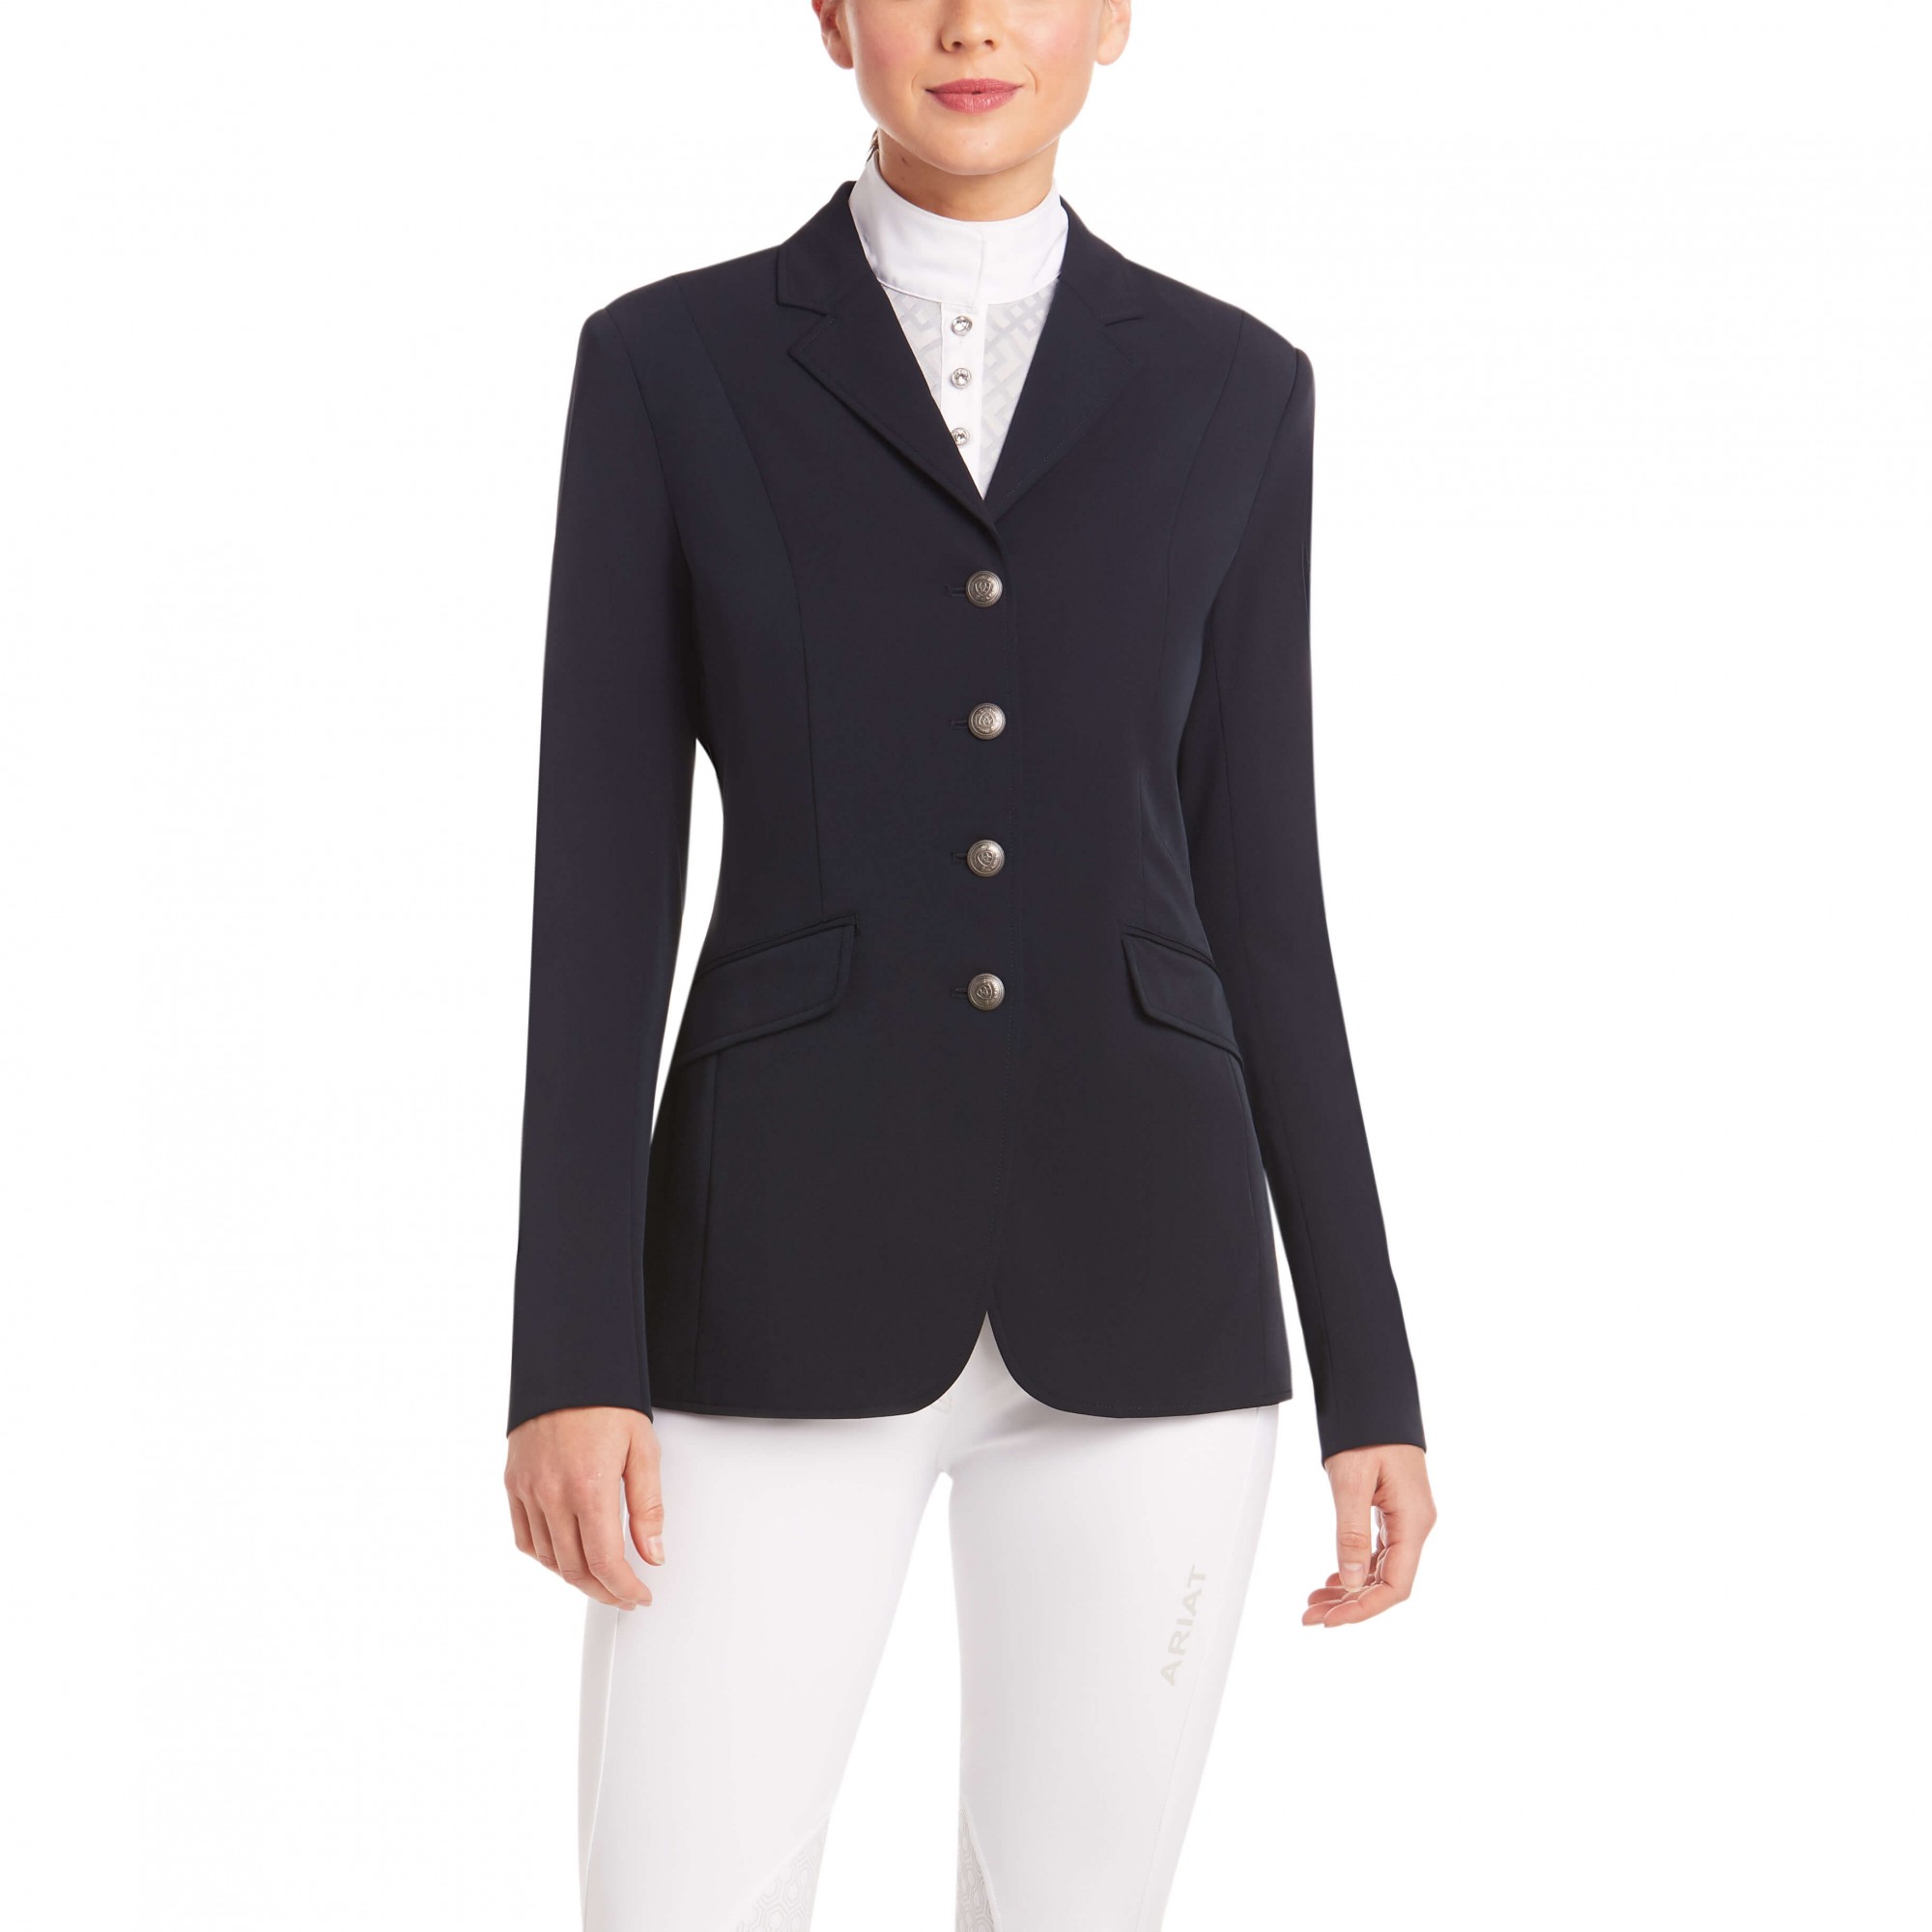 Ariat Palladium Womens Jacket Competition Jackets Navy All Sizes 